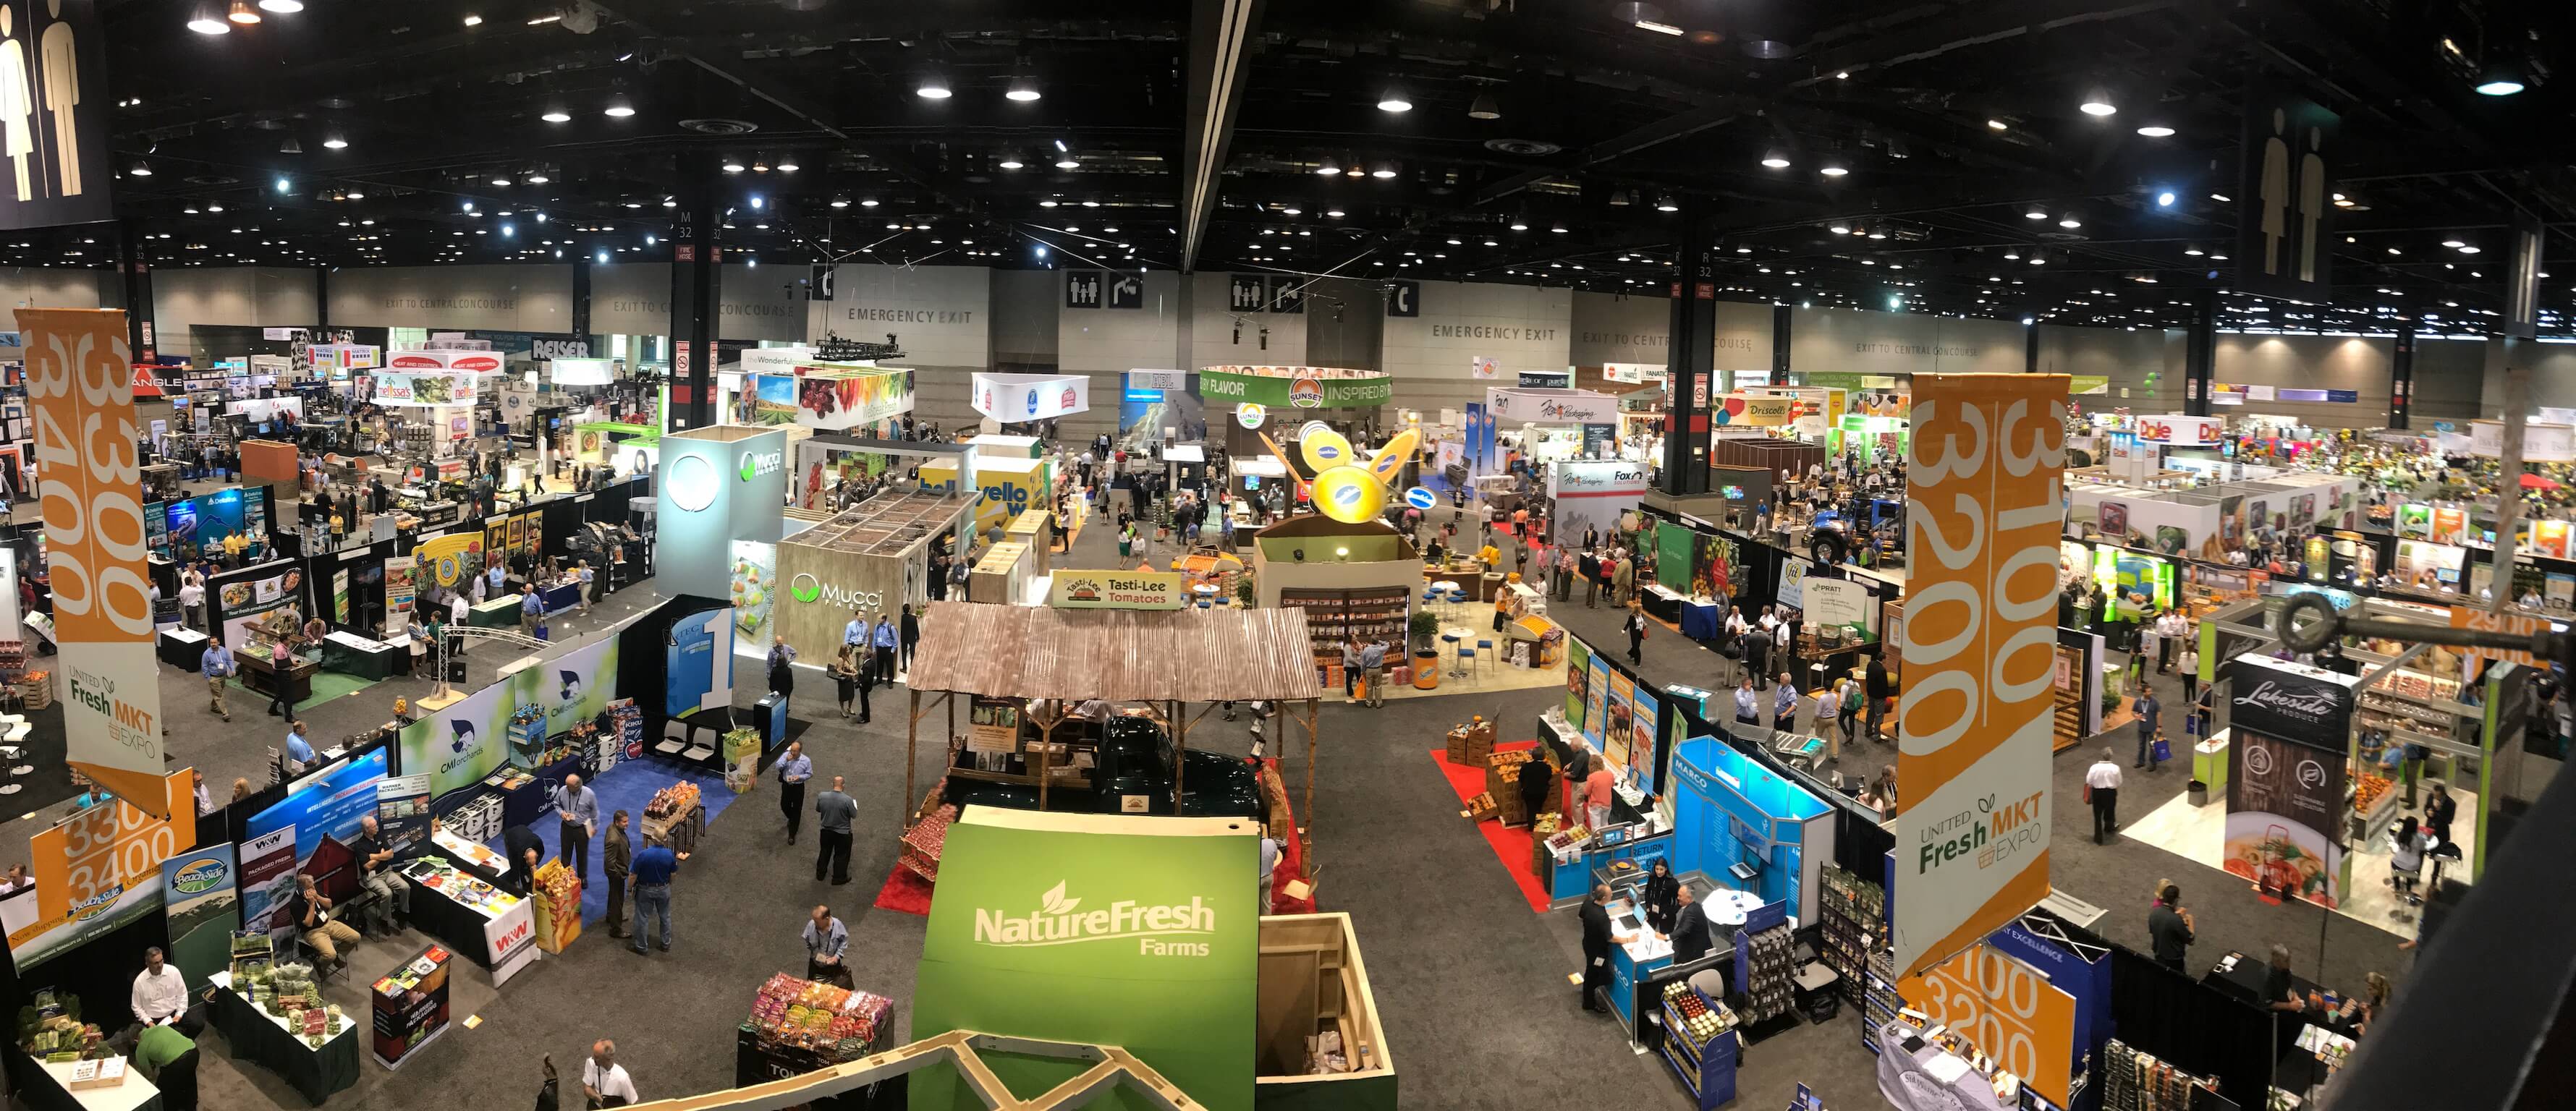 The United Fresh tradeshow floor is a great learning opportunity